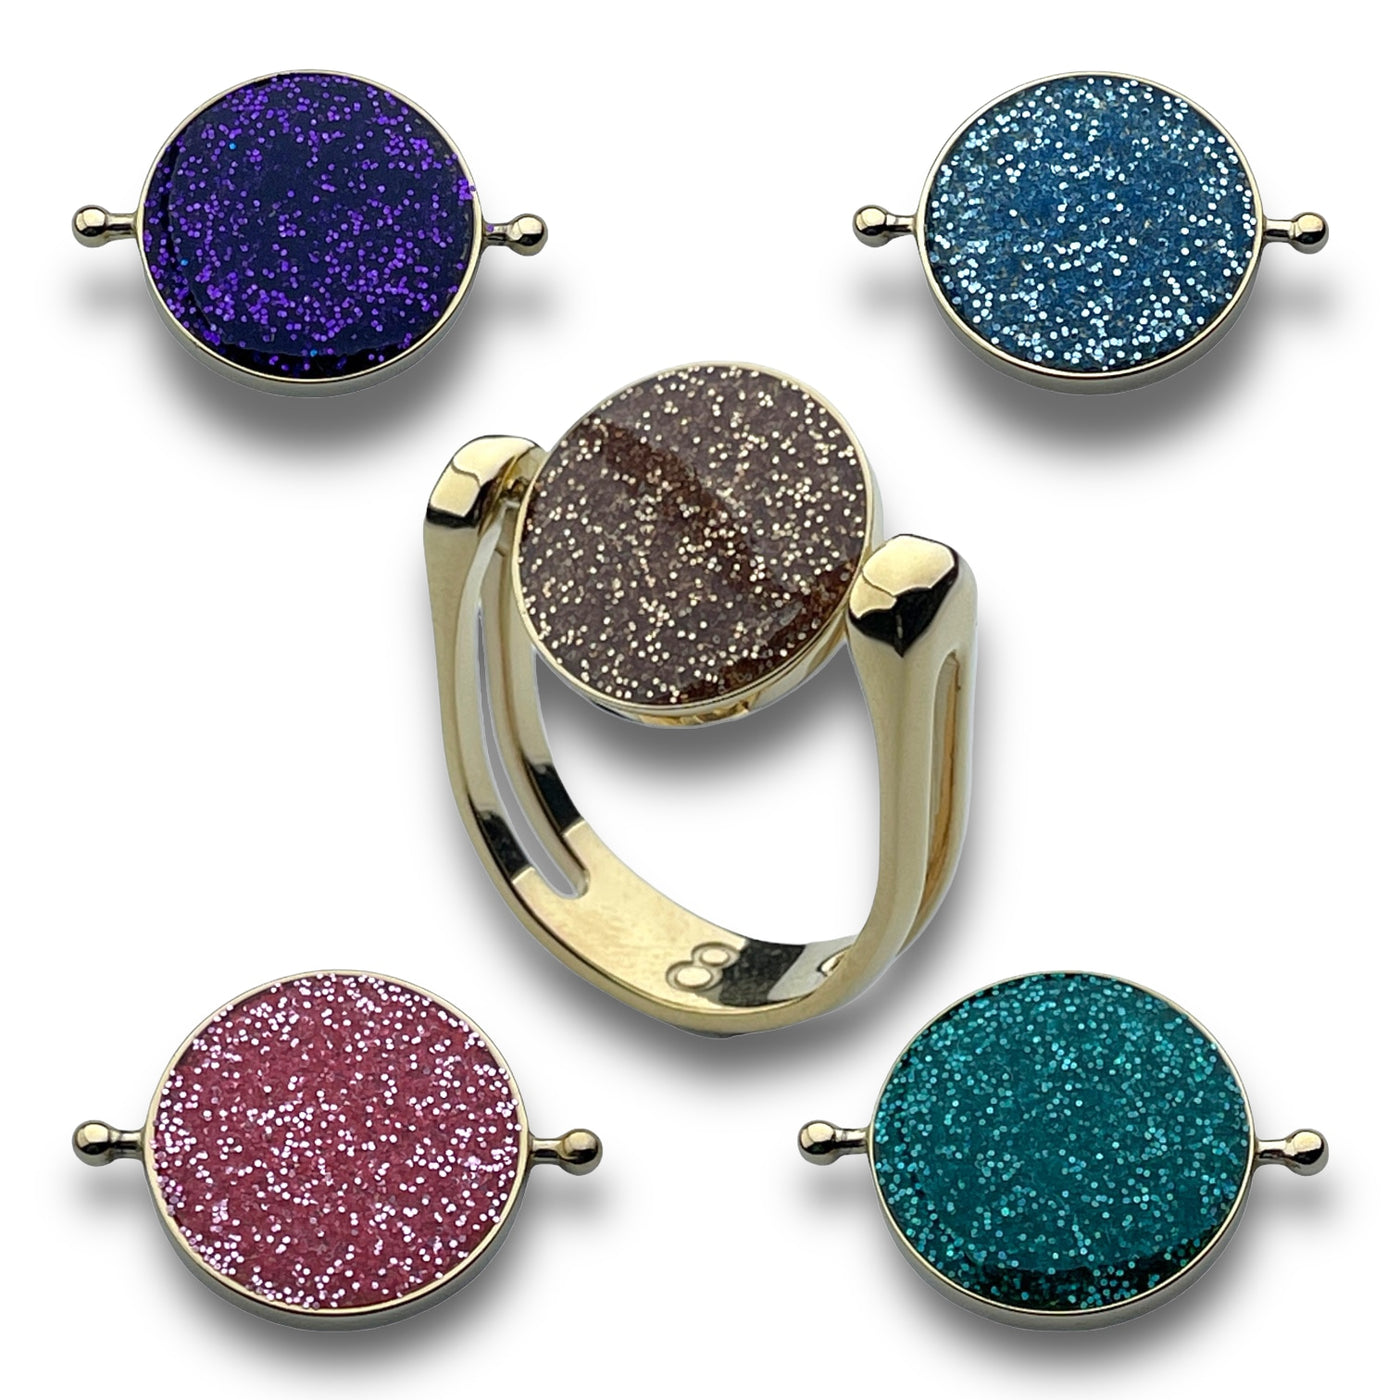 Circle-Shaped Glitter 5 in 1 Gift Set